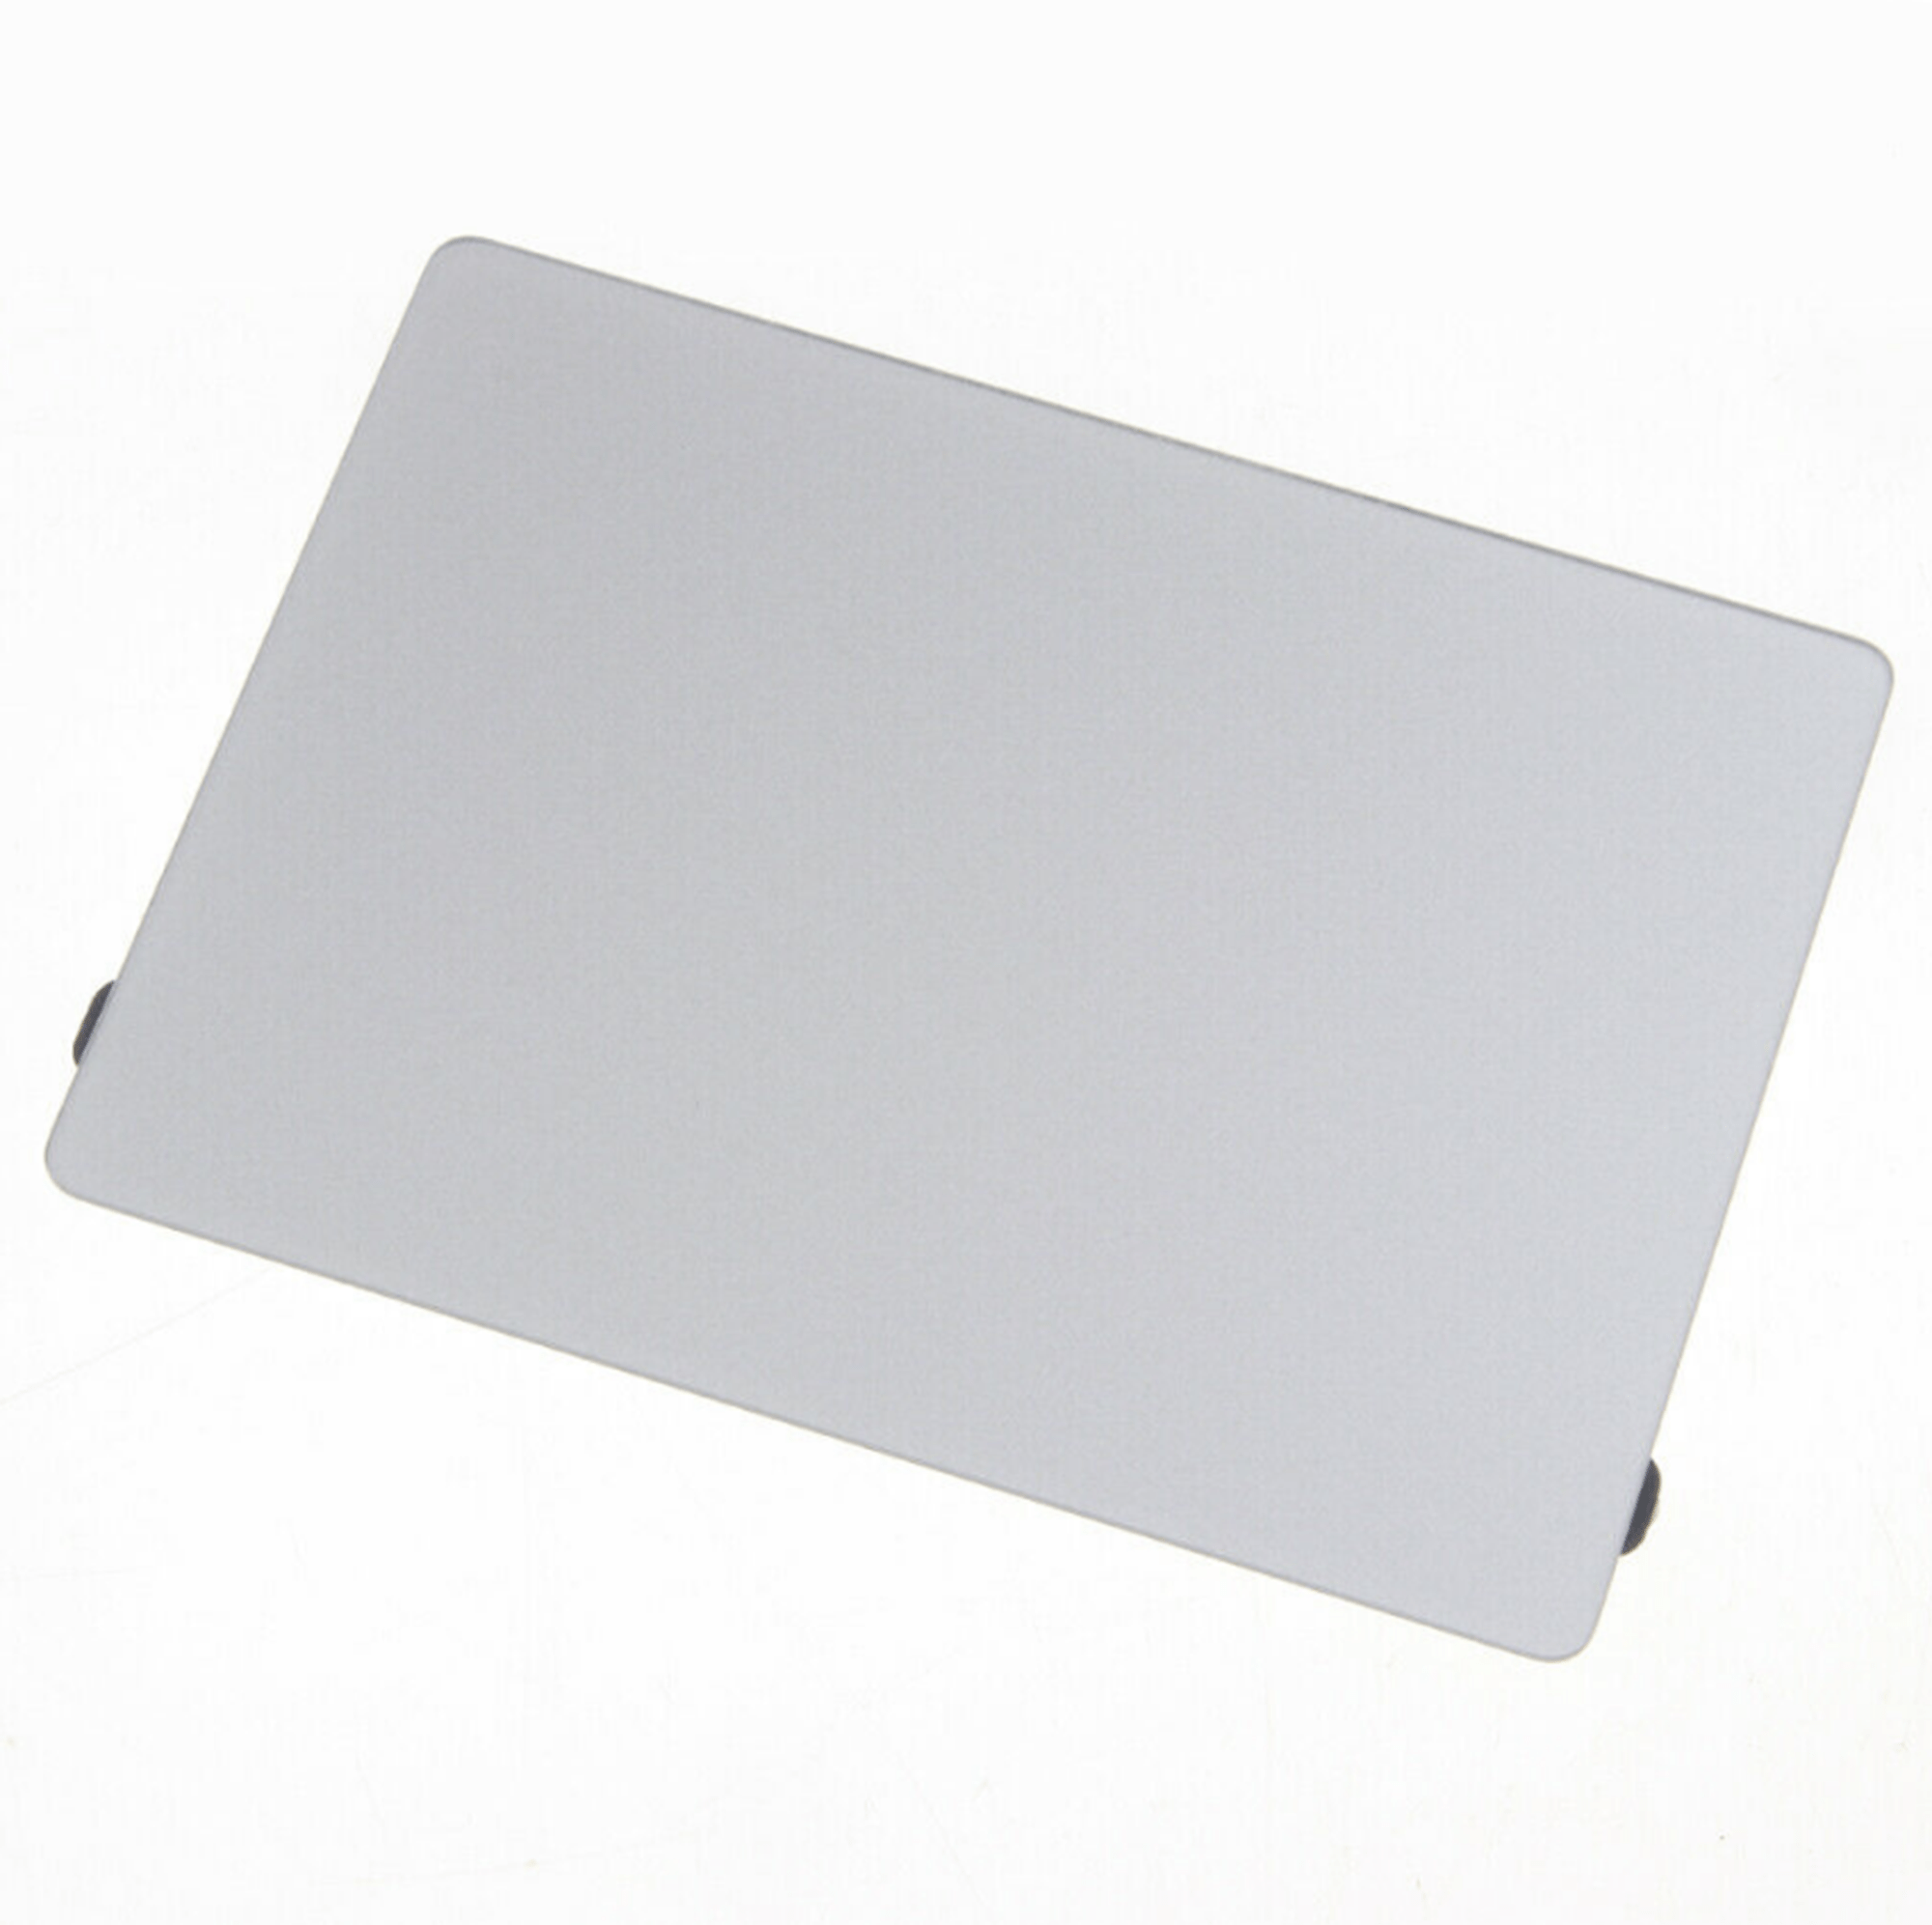 Macbook Air 13.3" A1466 Trackpad Touchpad 2013 2014 2015 2017 923-0438